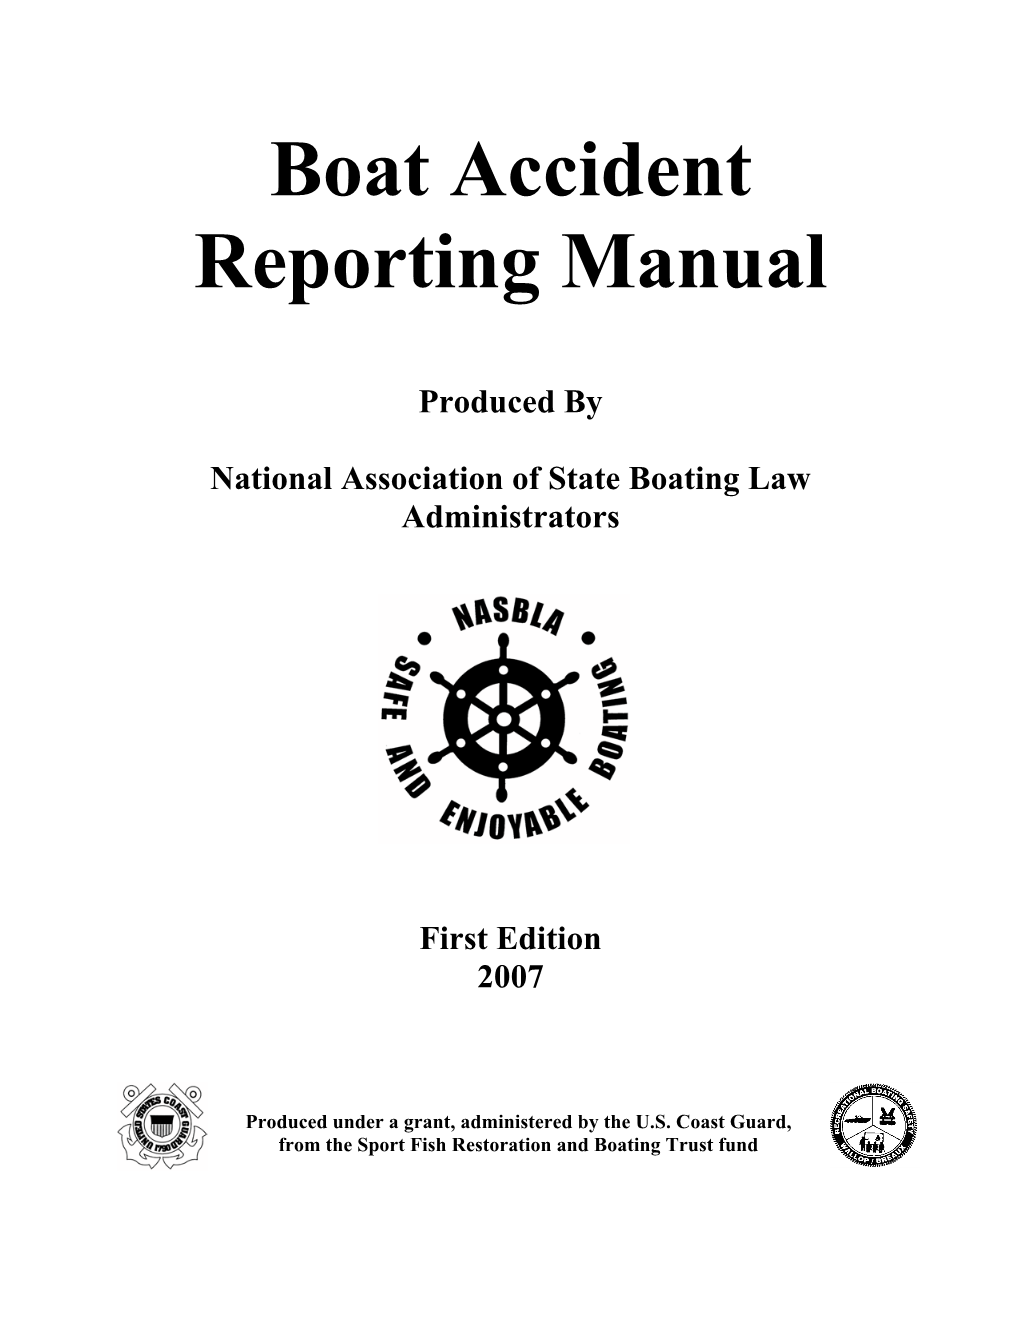 Boat Accident Reporting Manual